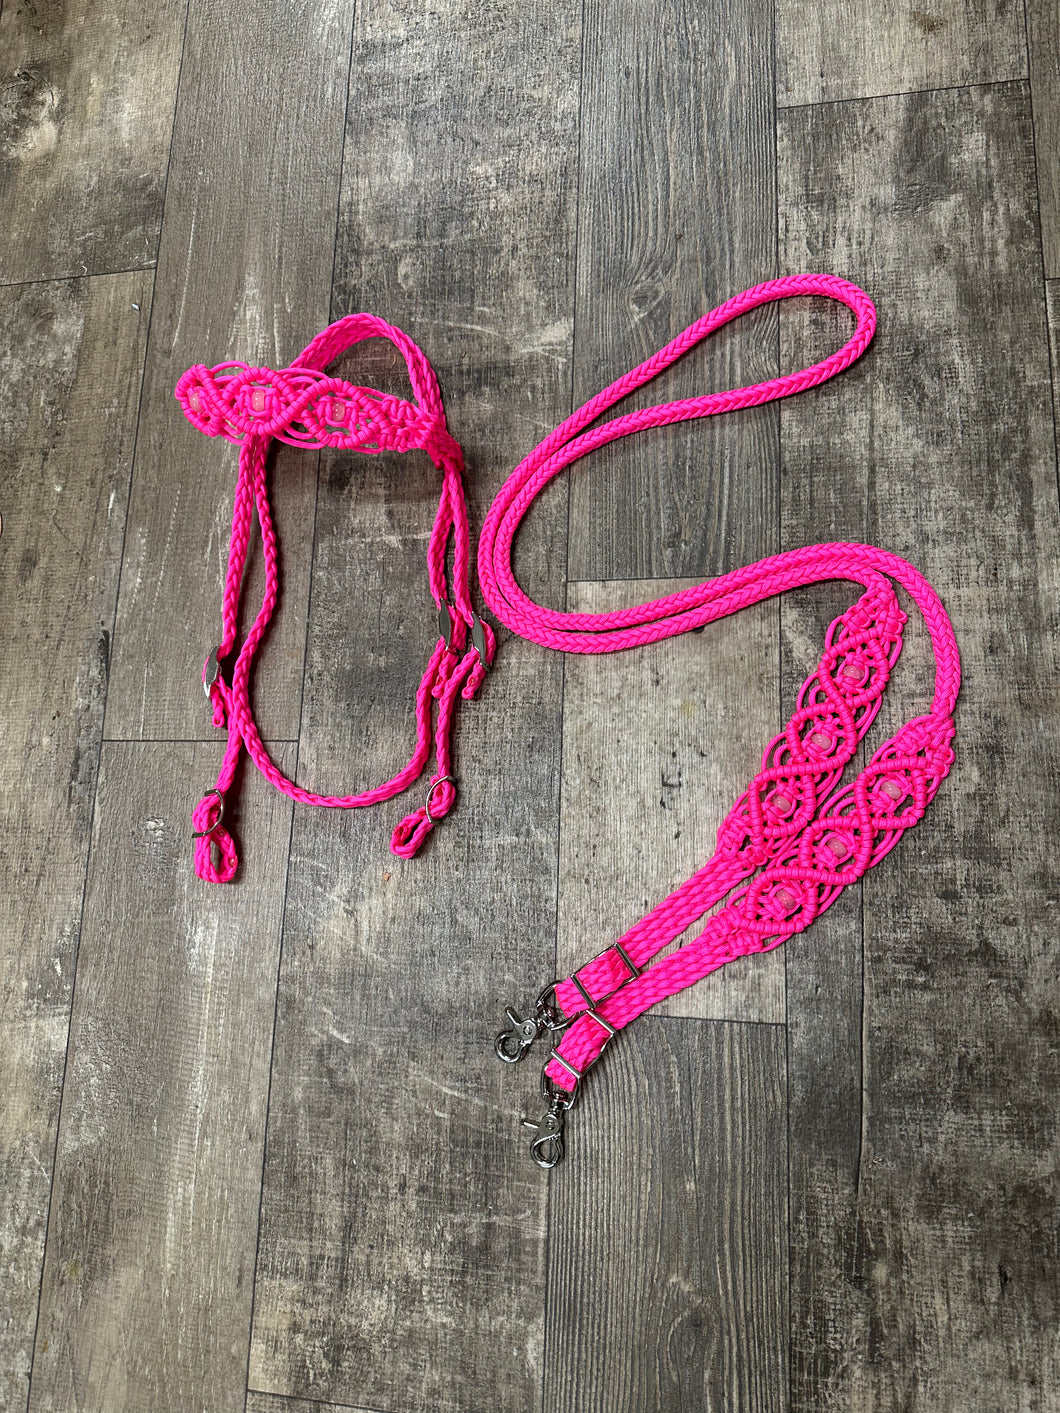 Hot pink Beaded Browband Headstall with a fancy braided browband with matching reins....all sizes.